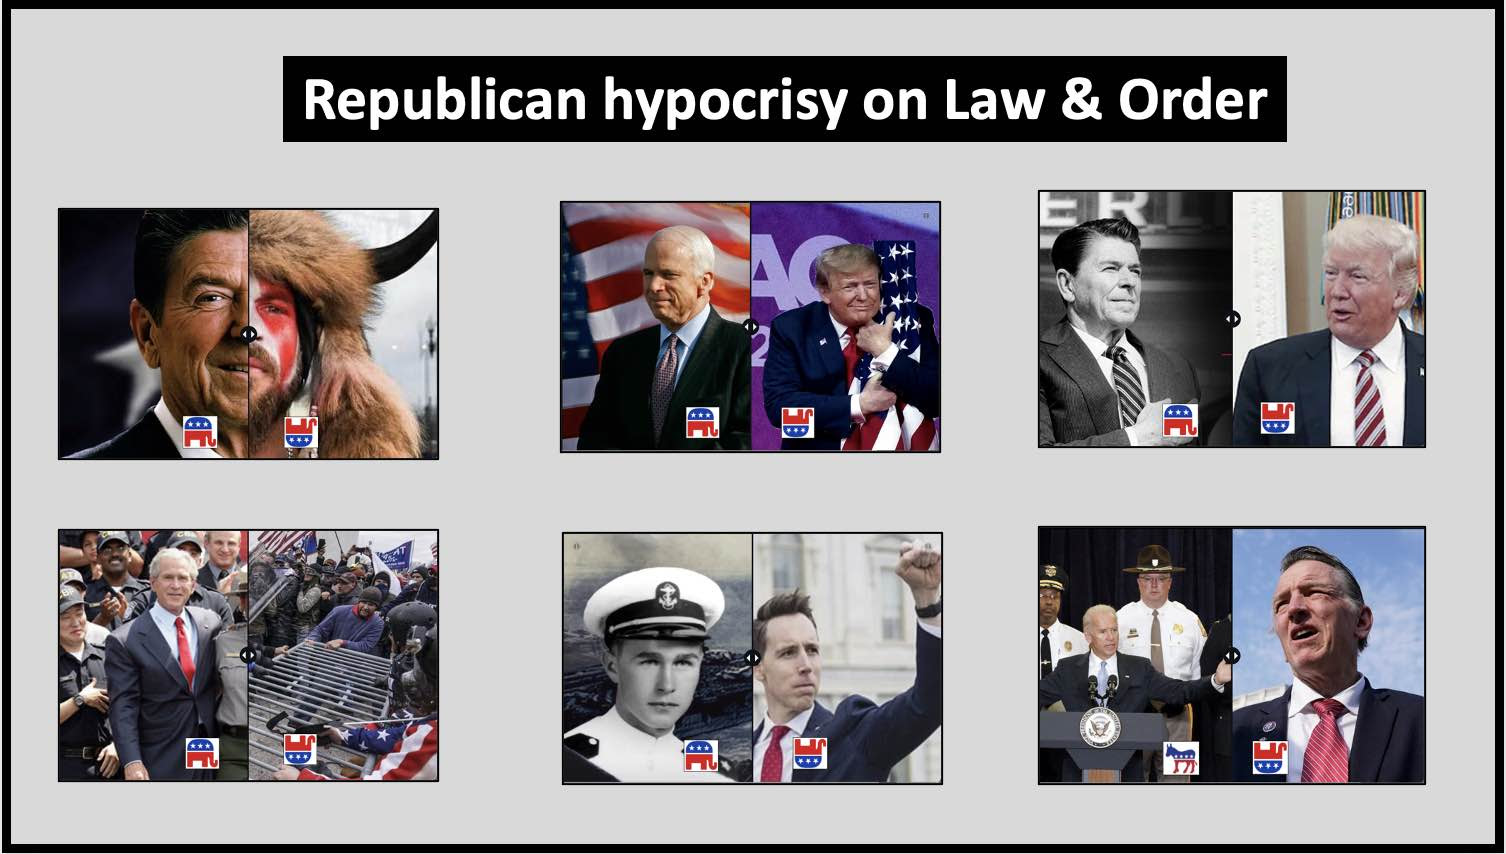 This infographic was designed with the StoryMaps app. It is interactive so readers can slide the images to see for themselves how far the GOP has fallen and only supporting law enforcement when it serves their interest. The StoryMap can be freely shared and automatically adjusts to the phone, tablet or laptop it is being seen on.